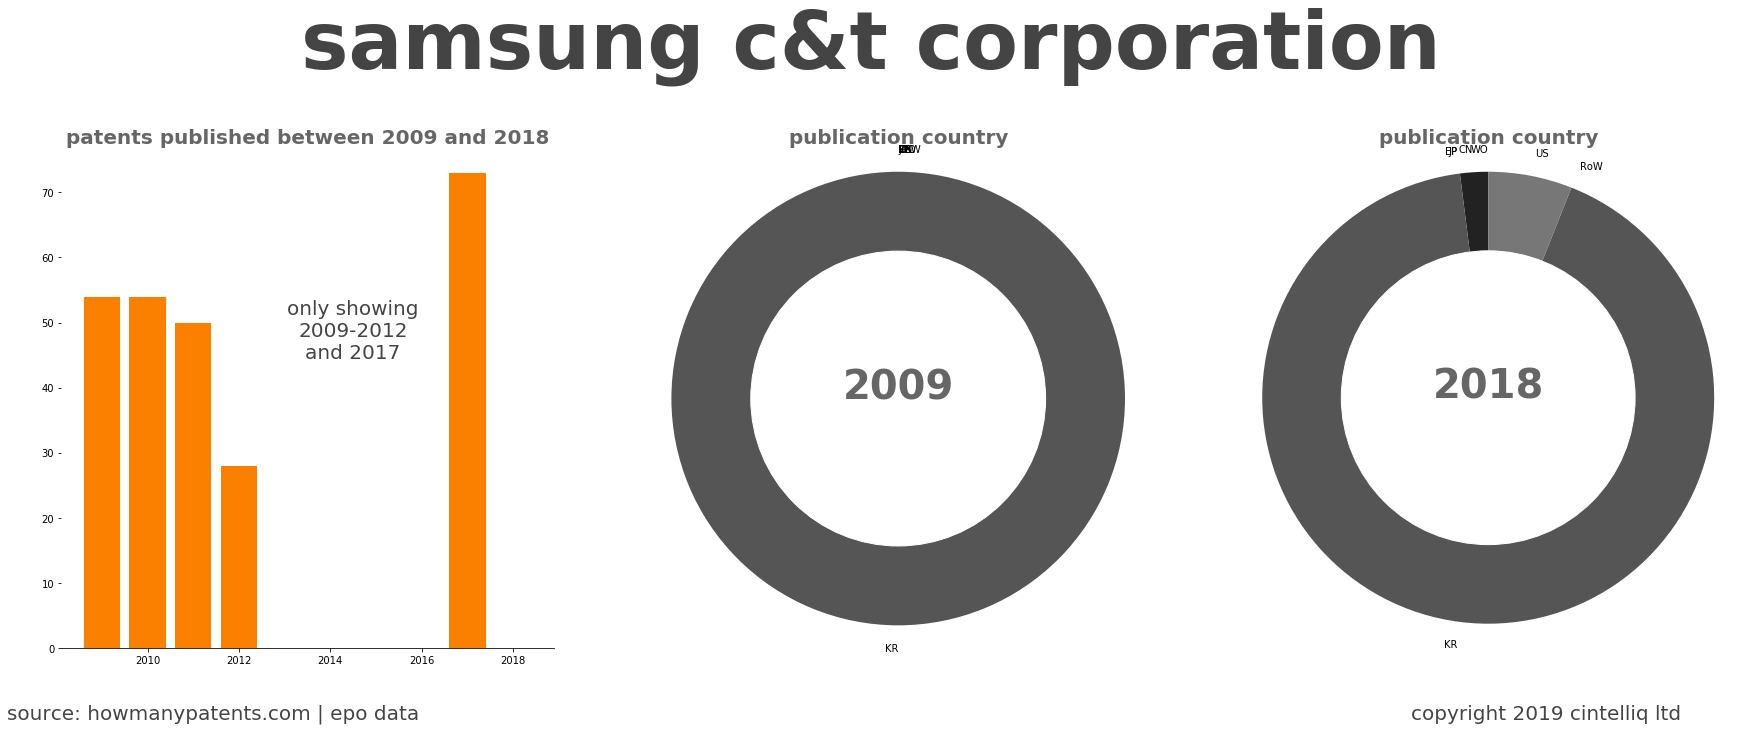 summary of patents for Samsung C&T Corporation